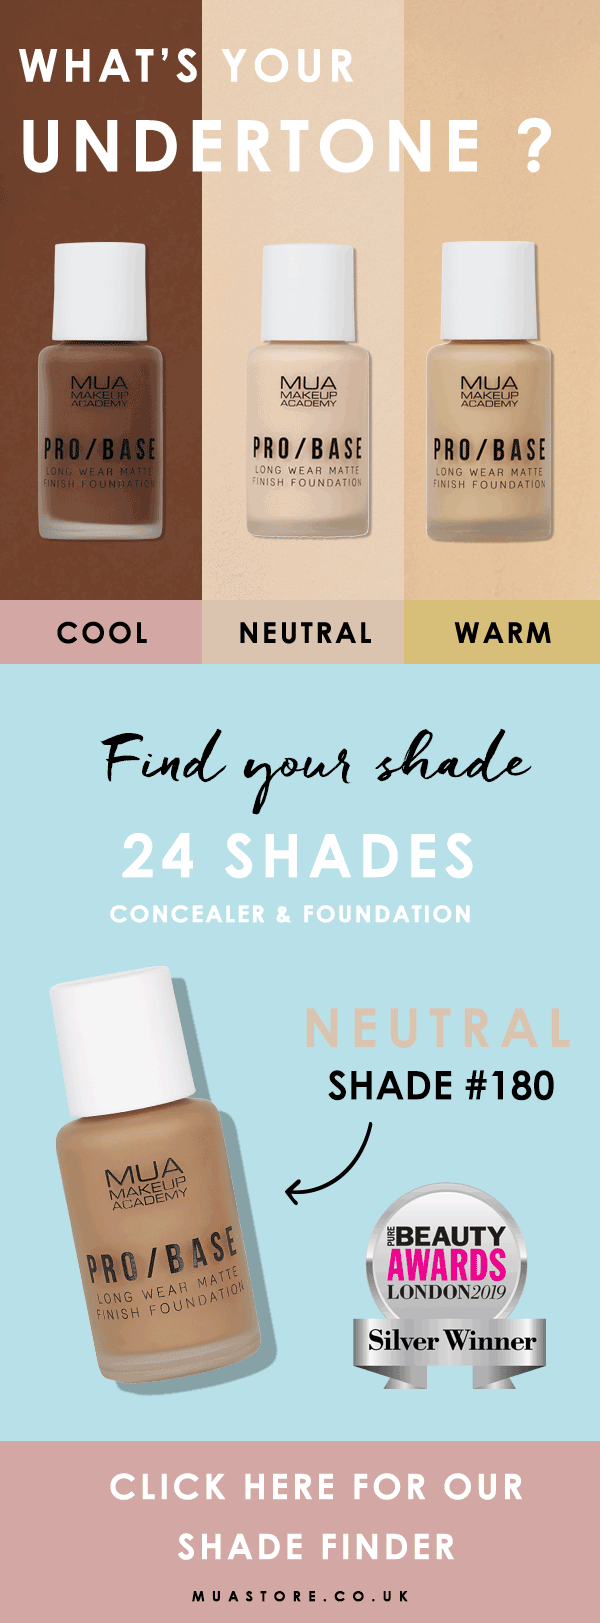 Want to find your perfect shade?